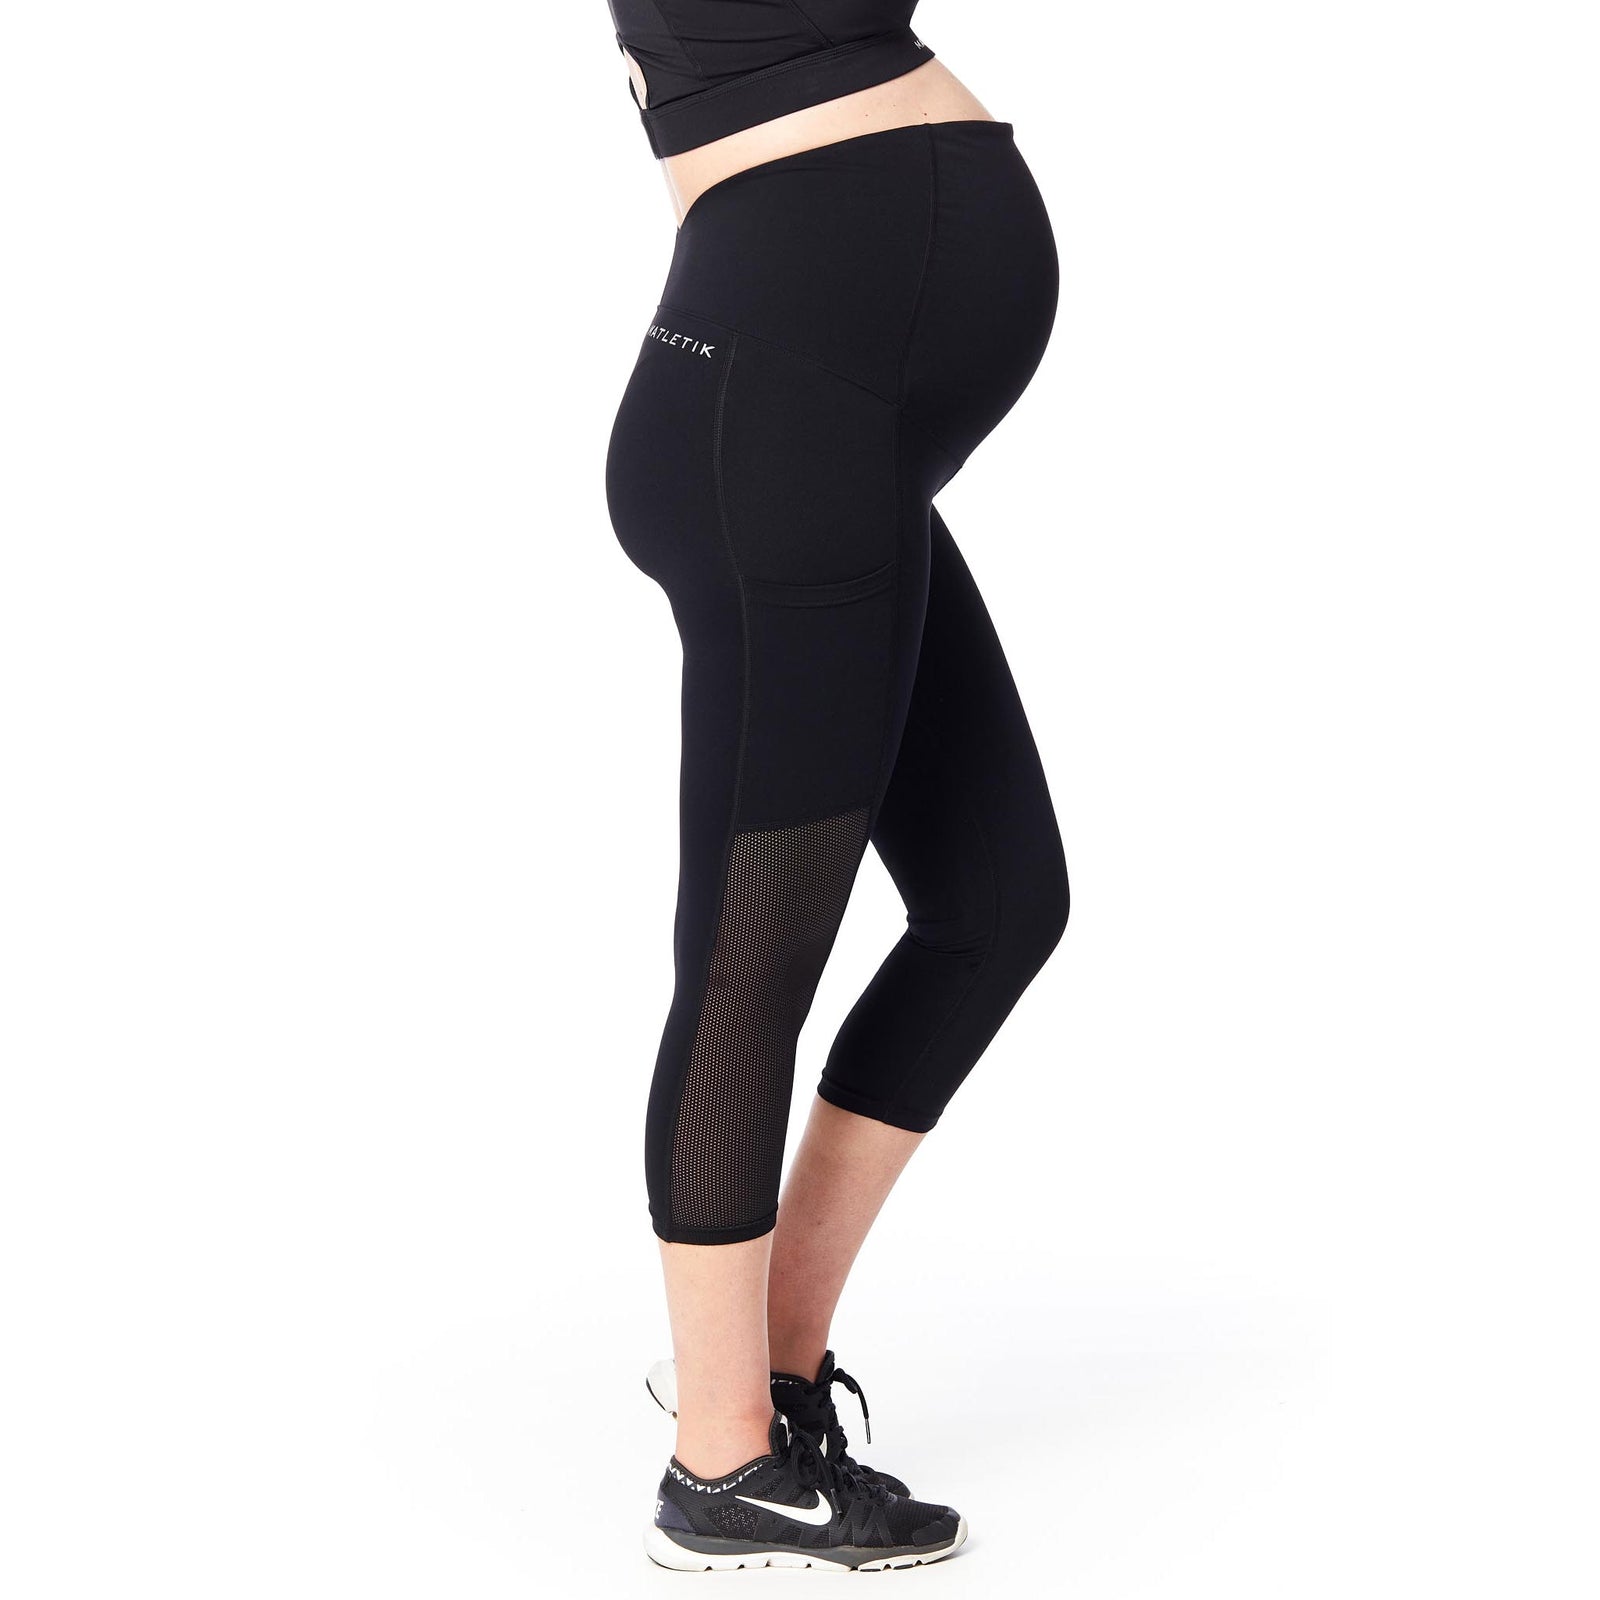 Maternity Activewear Capri Leggings with fold over panel side